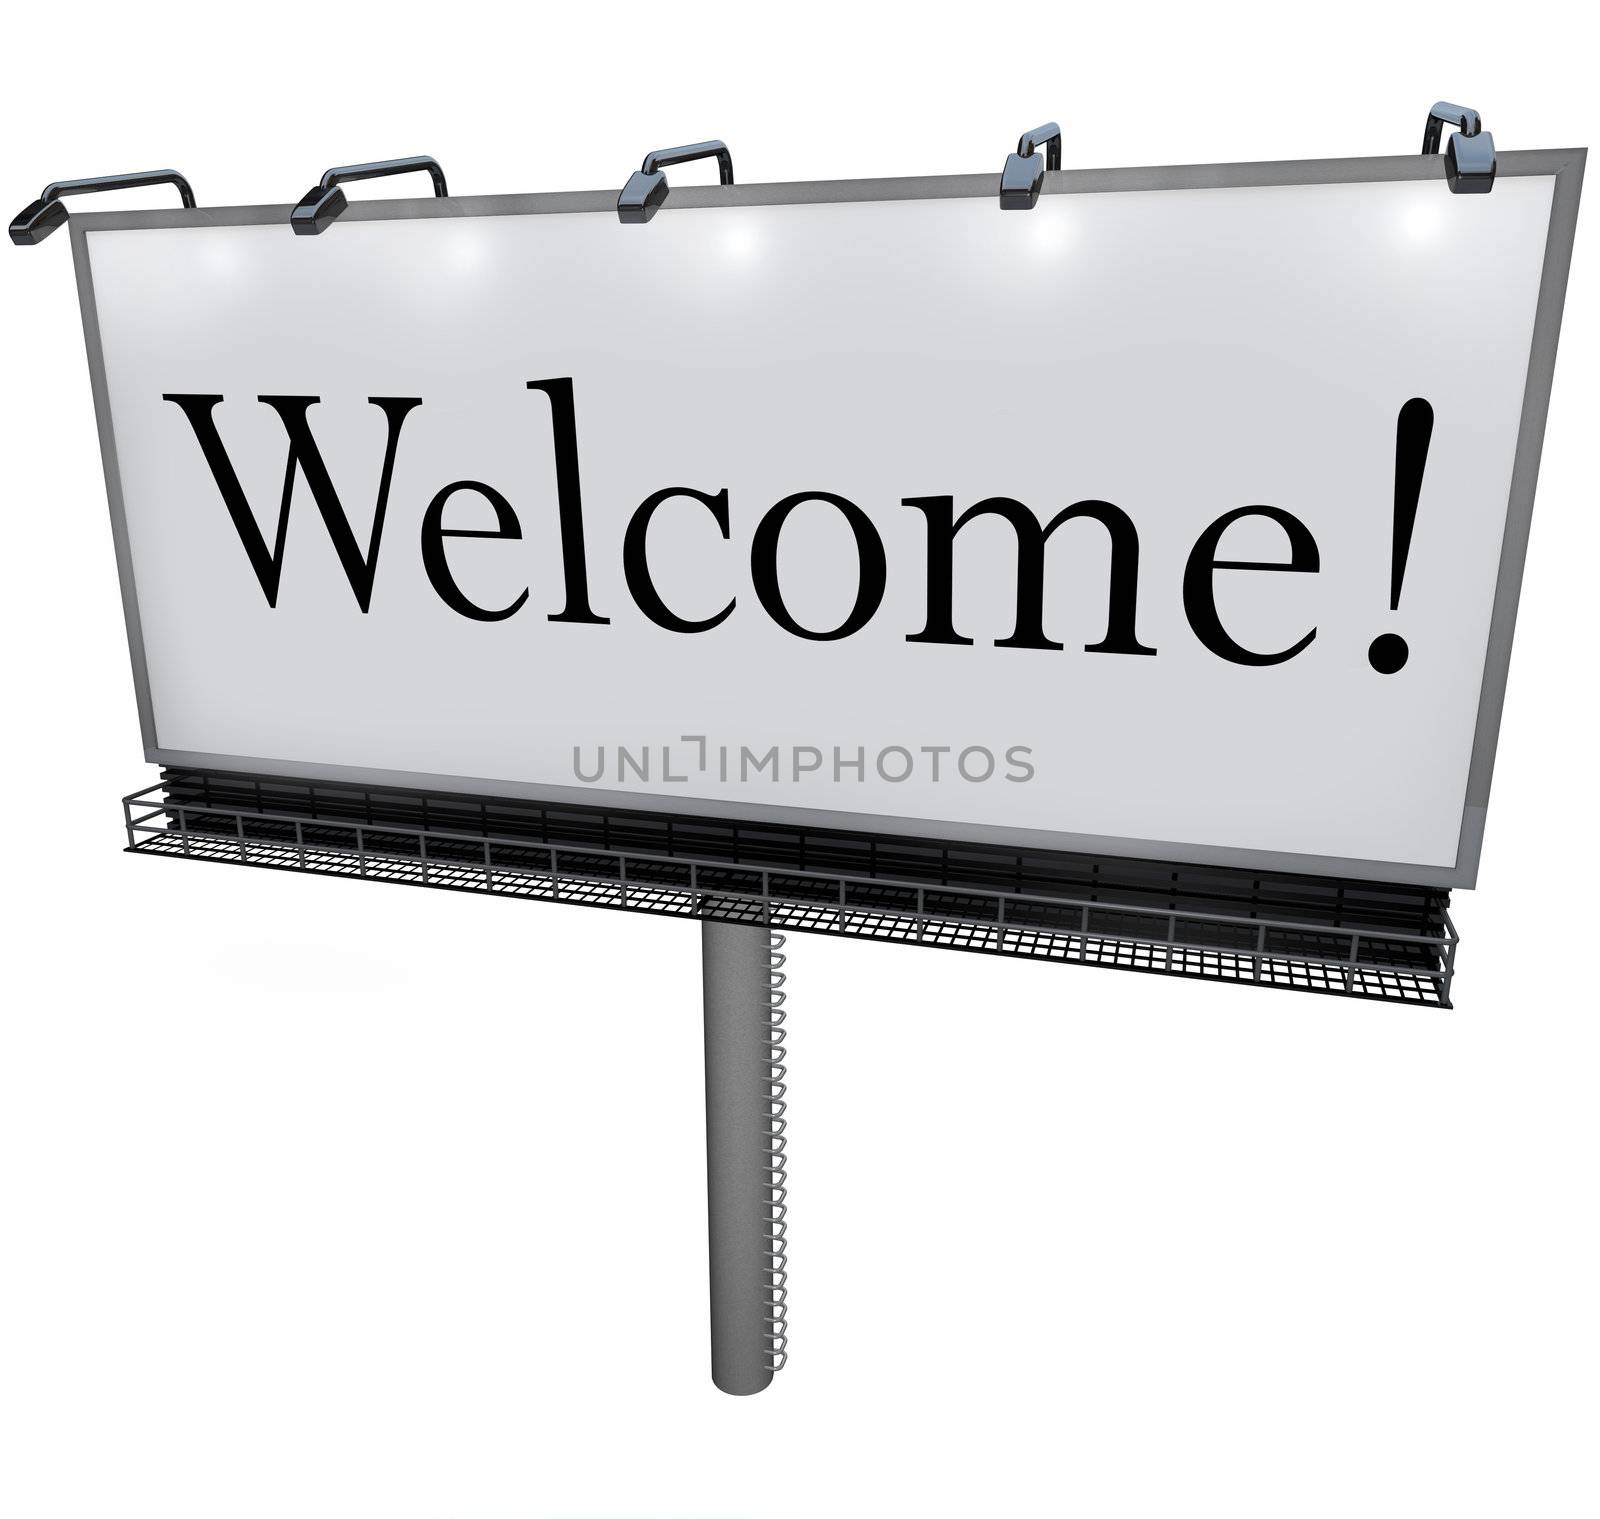 A large white billboard with the word Welcome greets you to a new place, neighborhood, company, or store